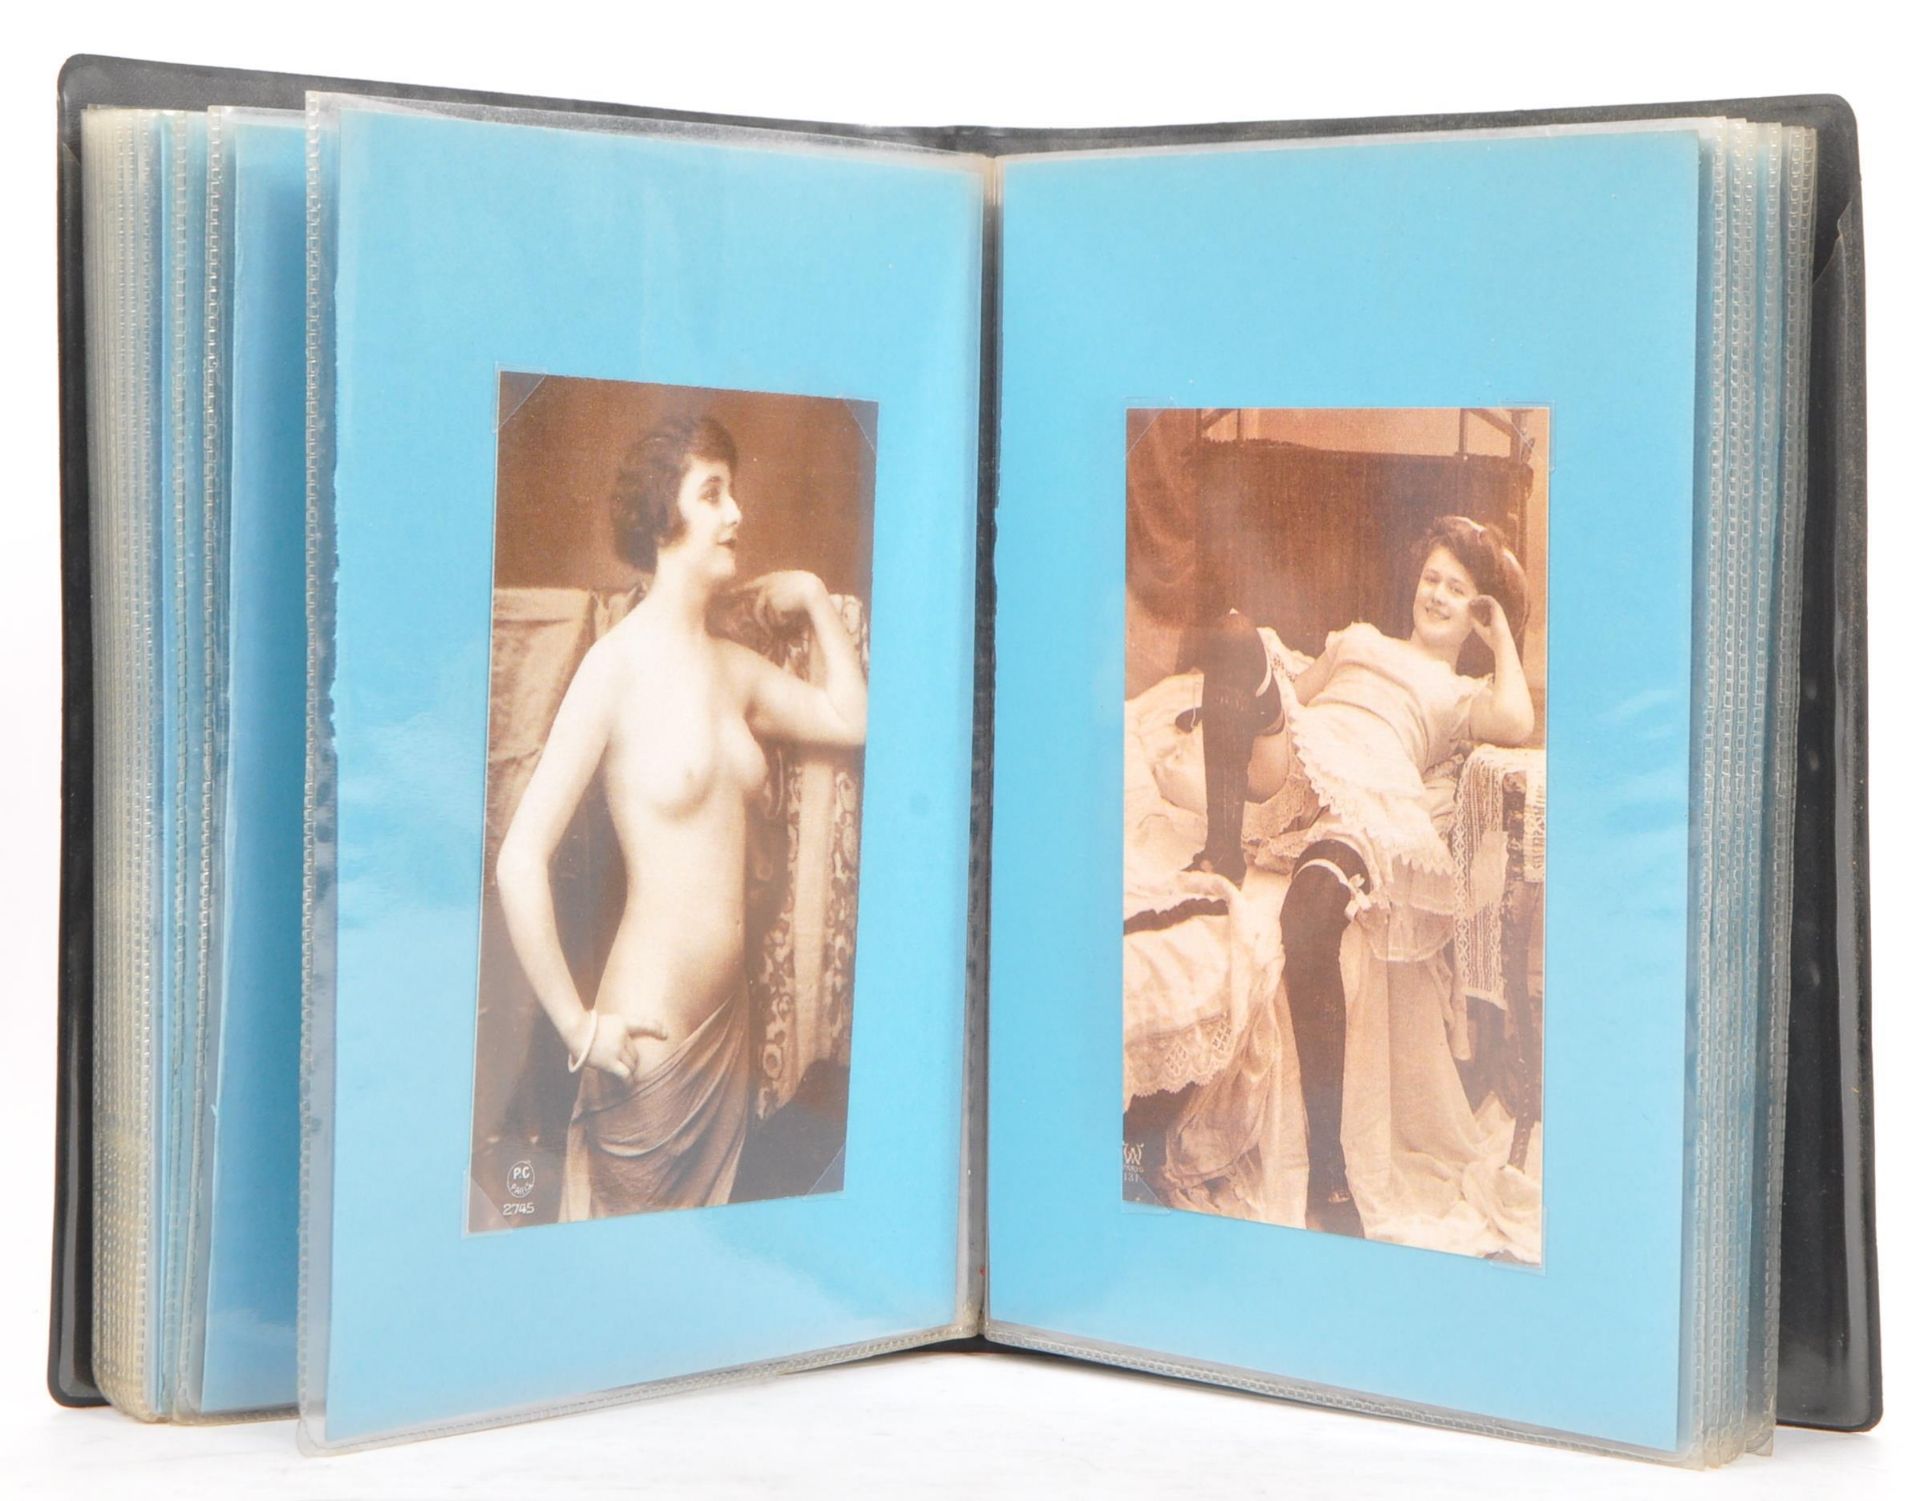 ALBUM OF FORTY FRENCH EROTIC REPRODUCTION SEPIA POSTCARDS - Image 3 of 6